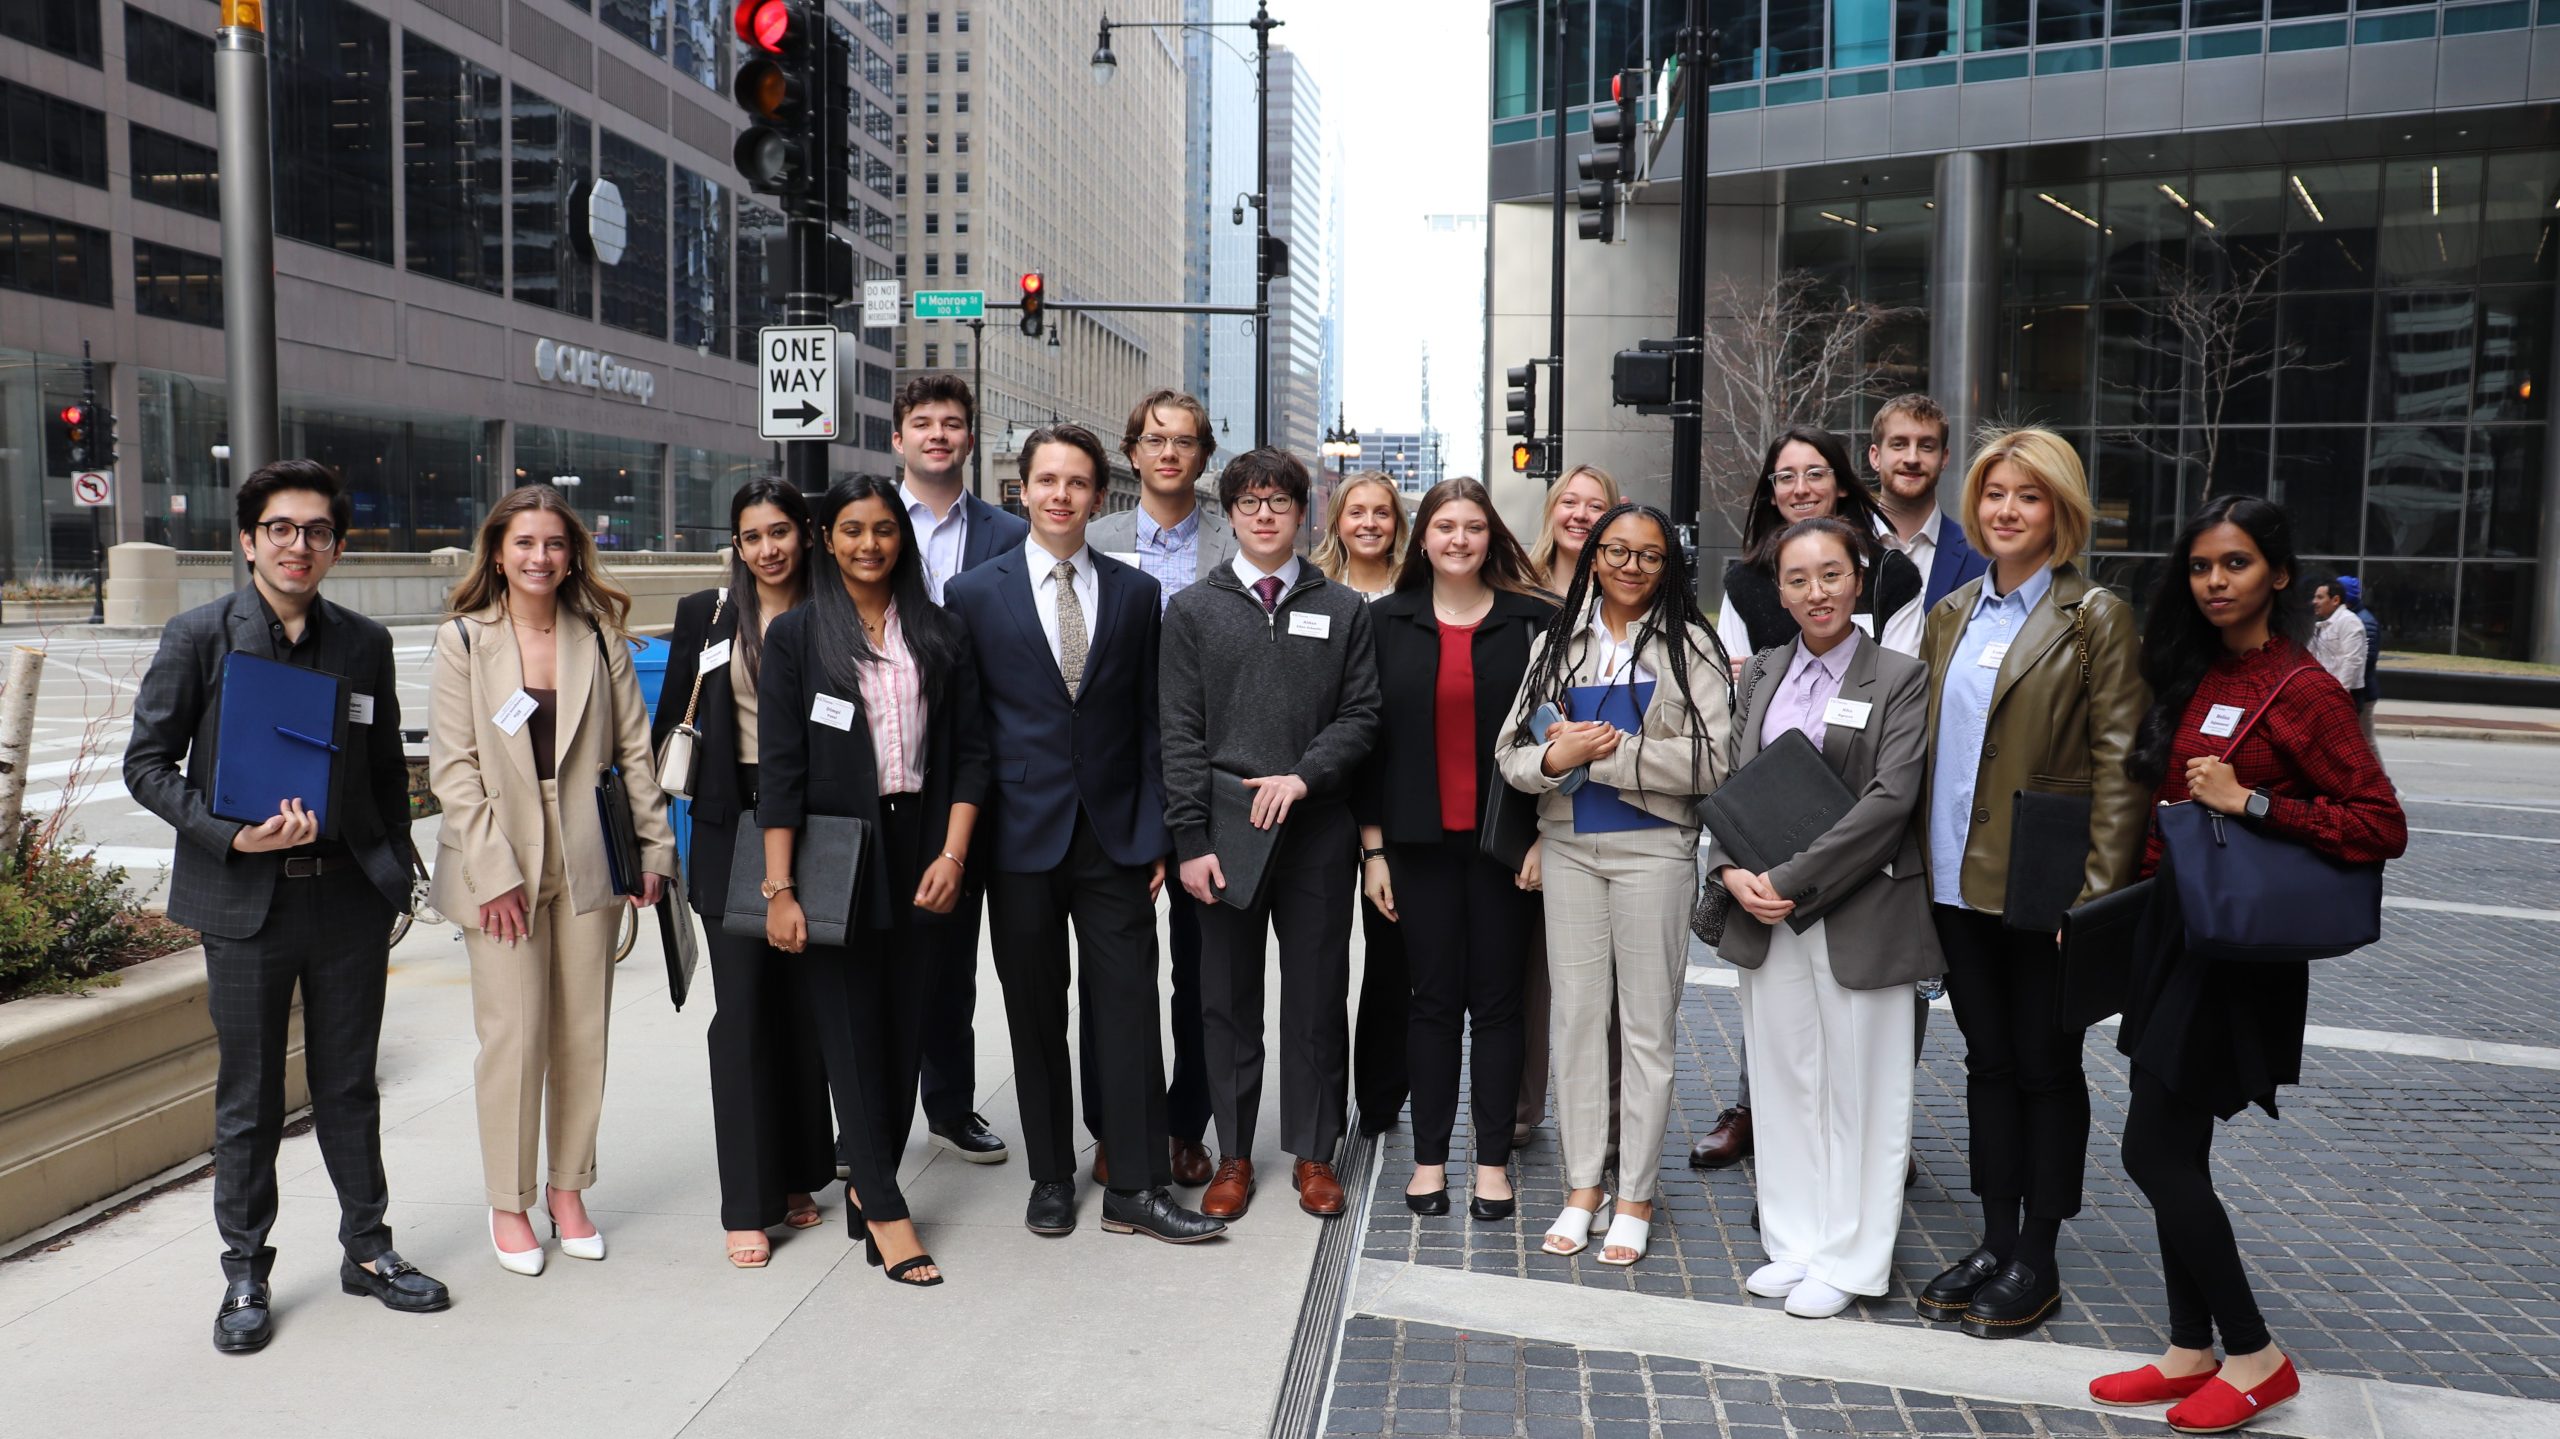 A group of 17 students stand in 2 rows on a sidewalk. They are the participants of the 2023 Career Trek in Chicago.